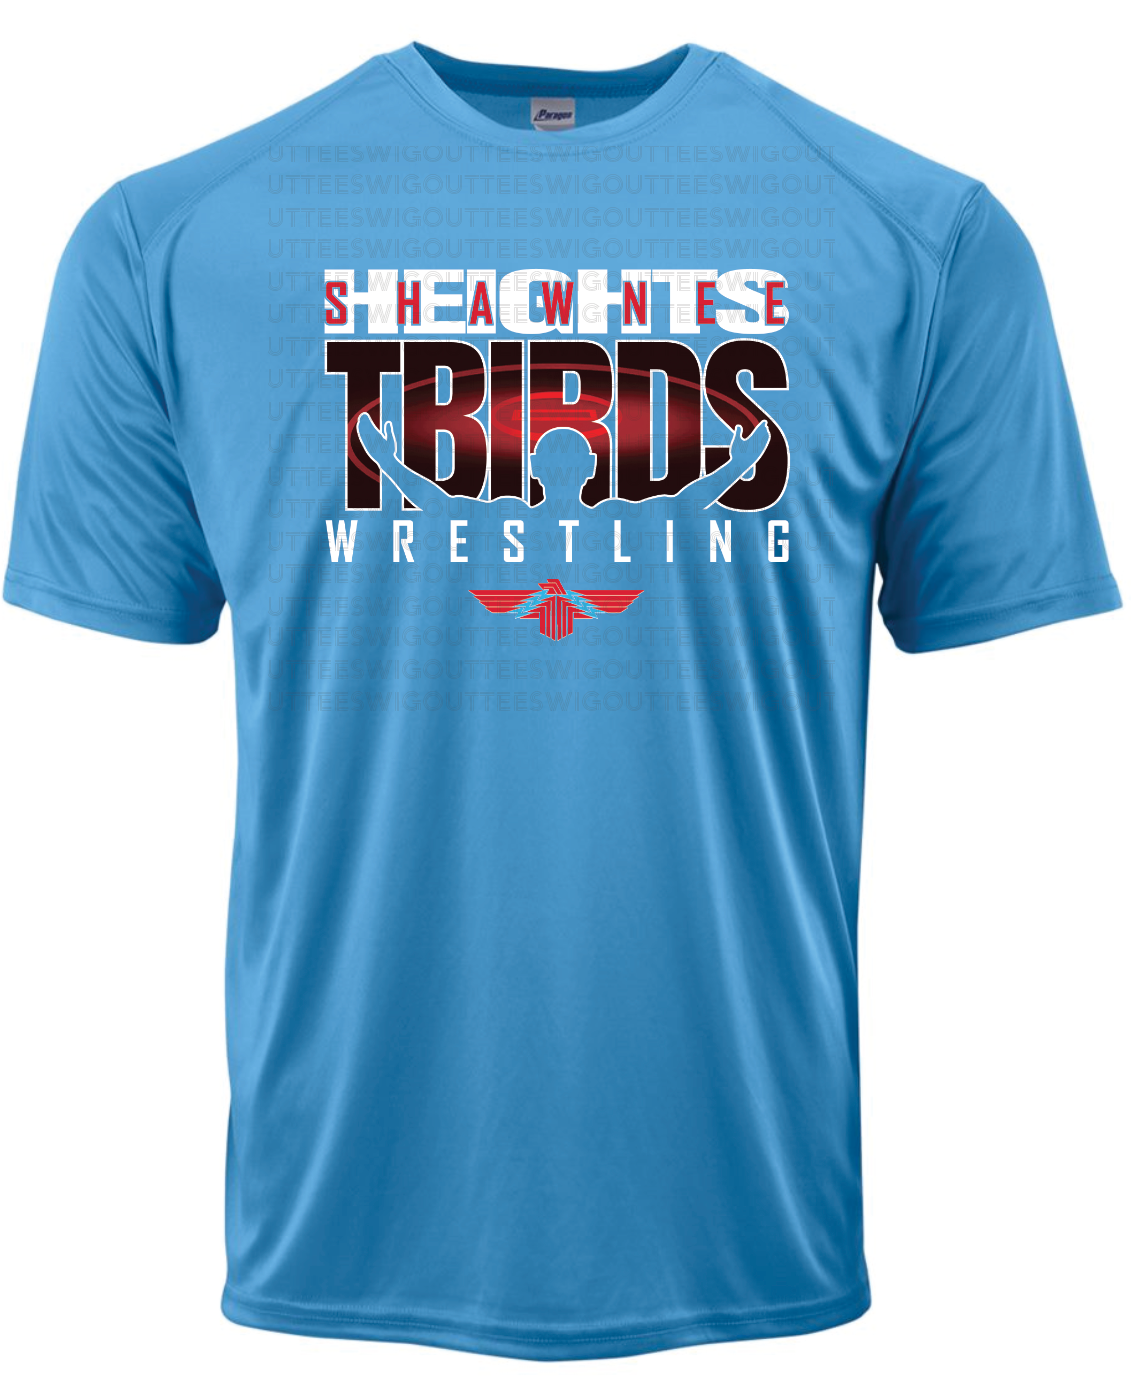 Heights Wrestling Paragon Performance T-shirt